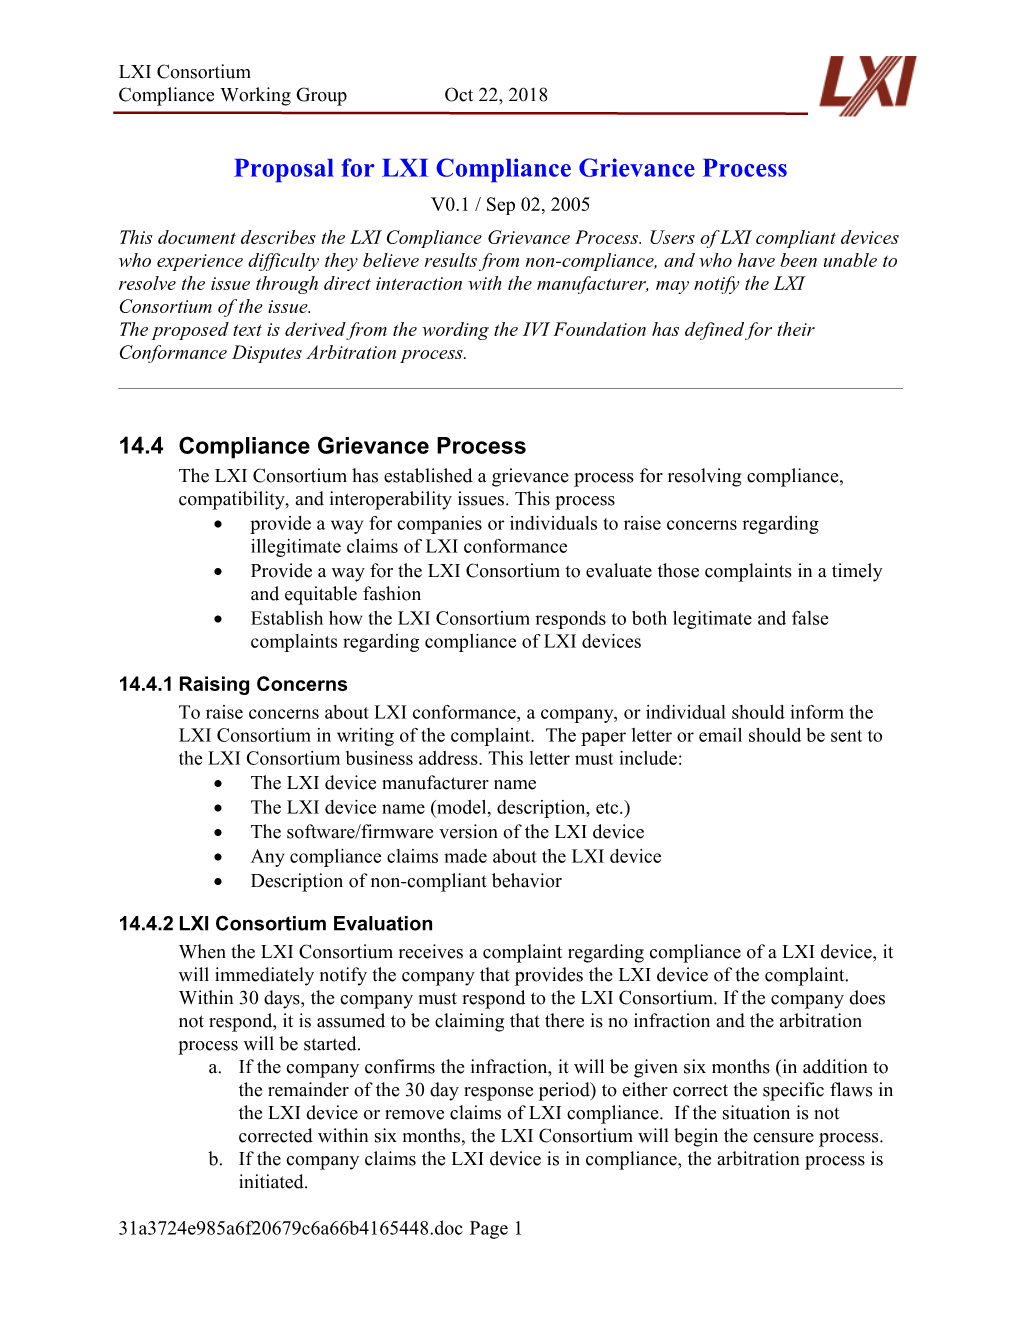 Proposal for LXI Compliance Grievance Process